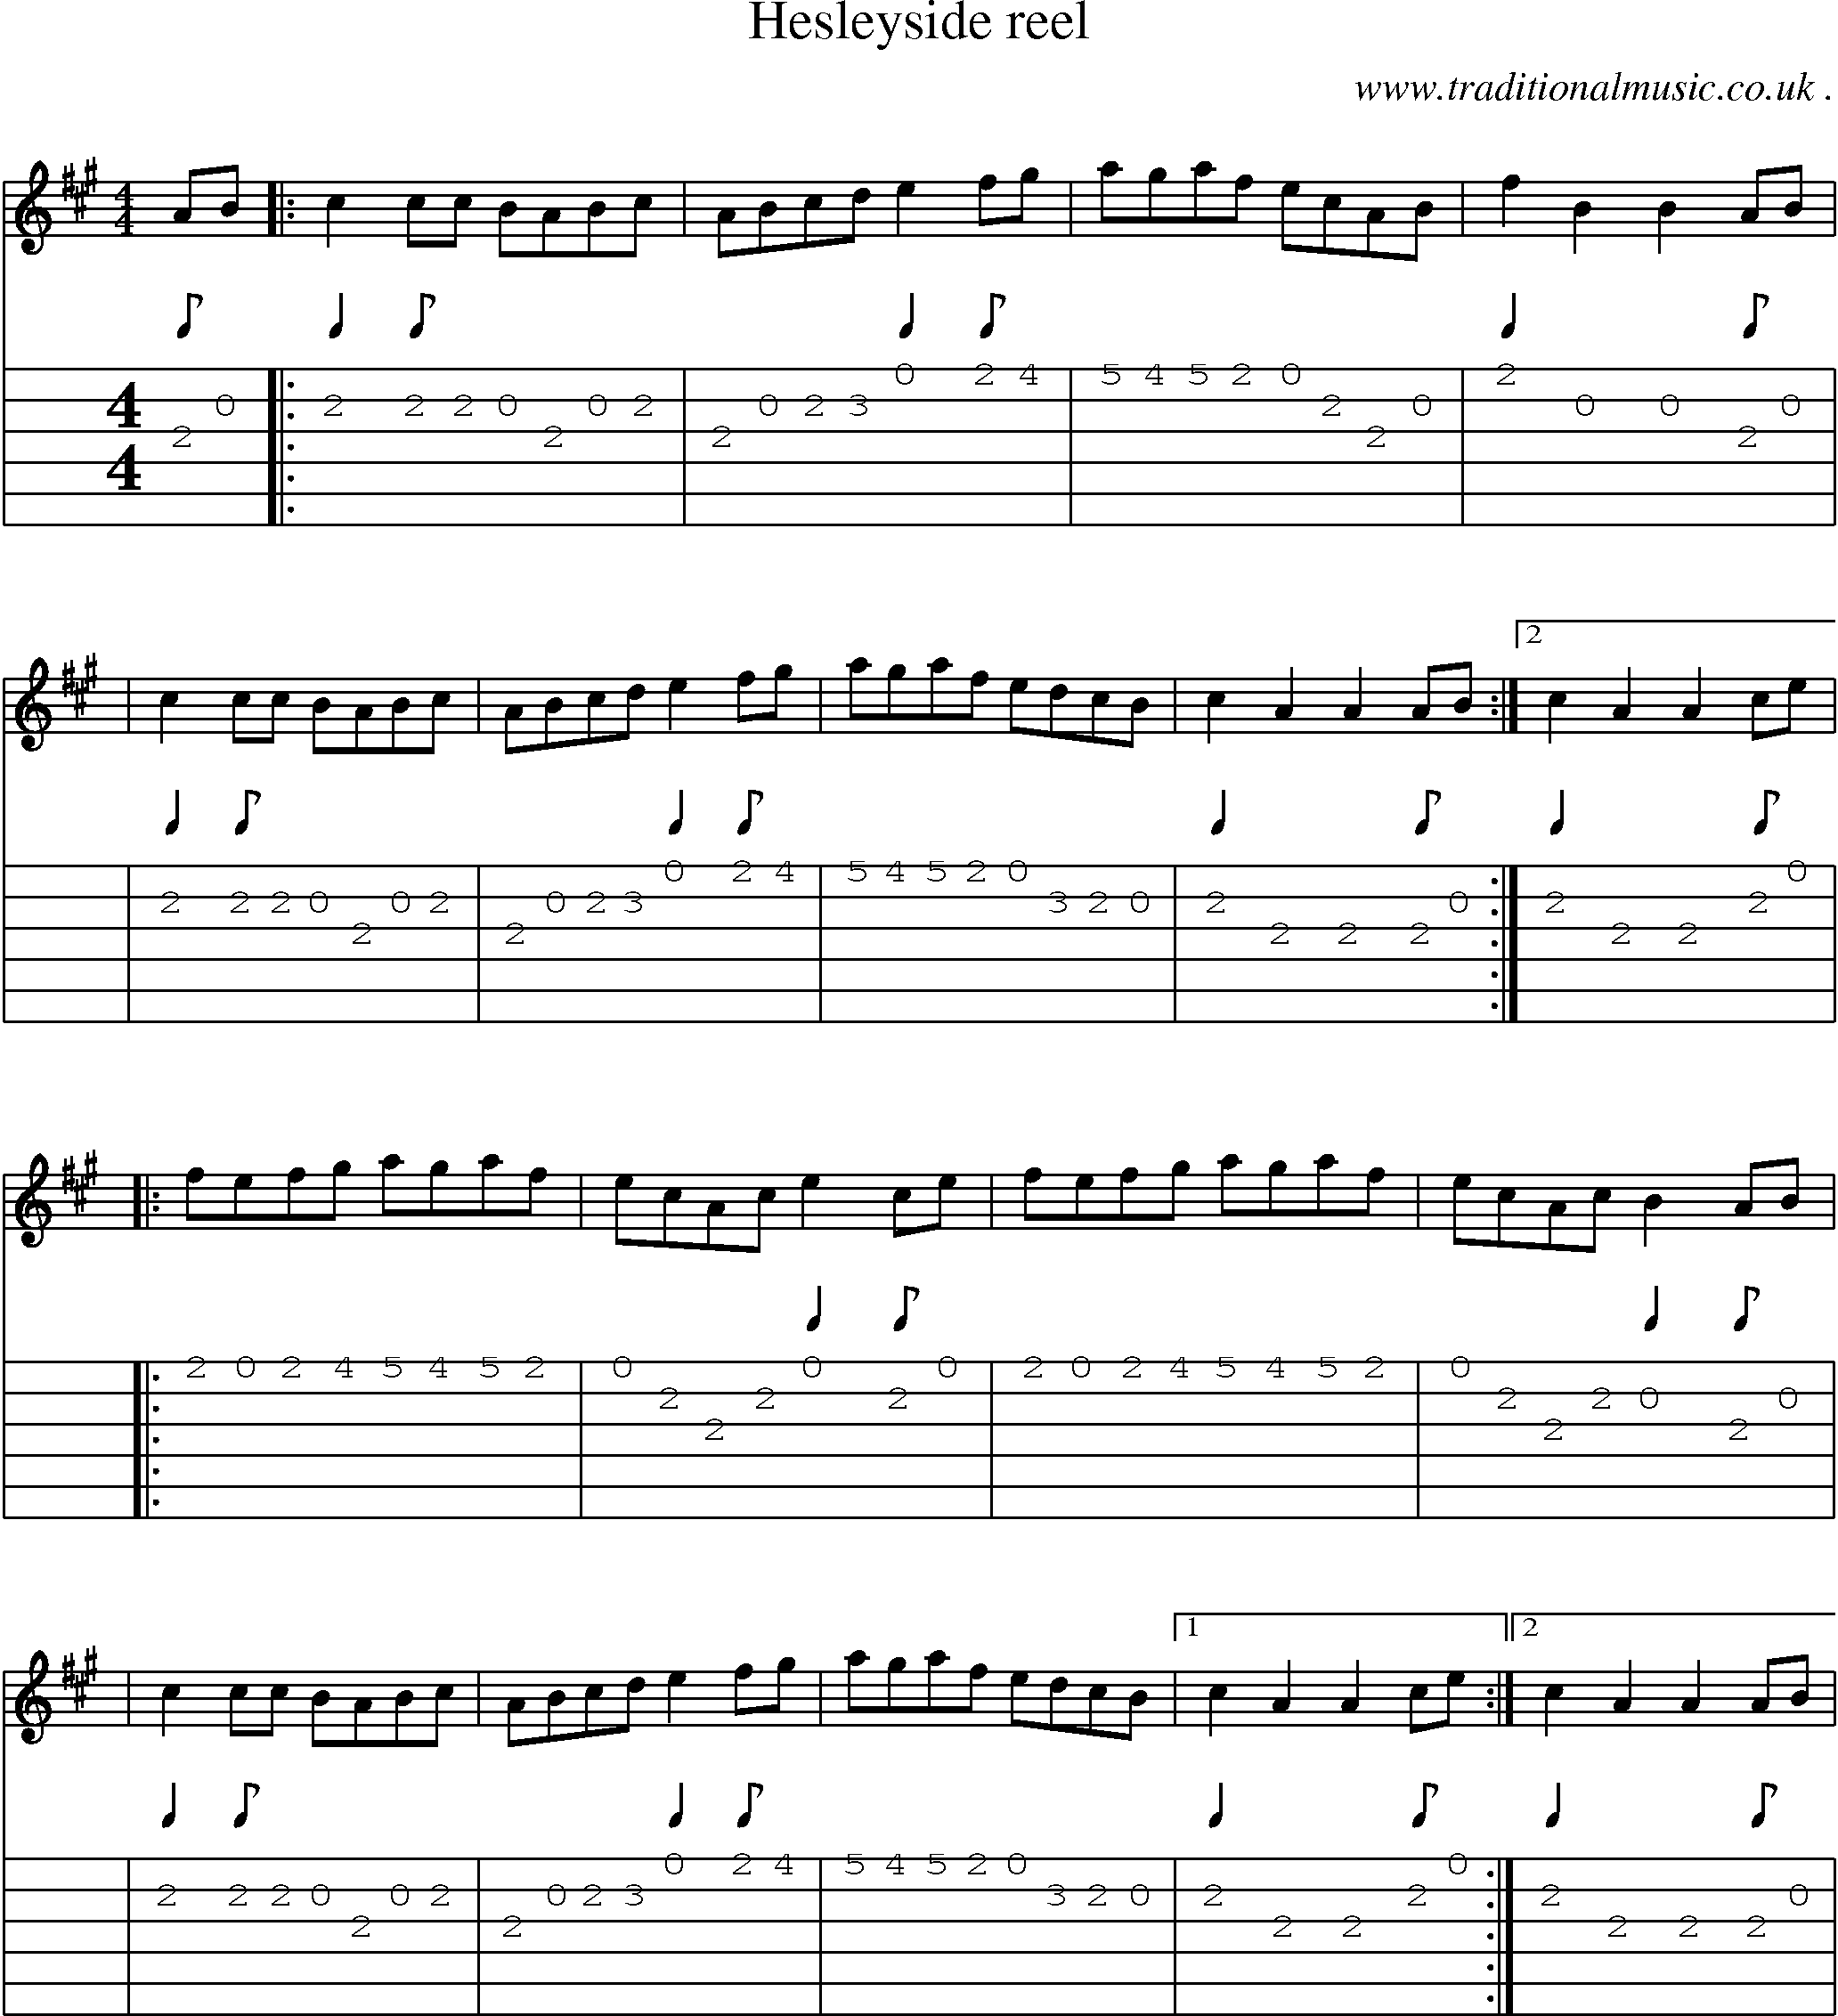 Sheet-Music and Guitar Tabs for Hesleyside Reel